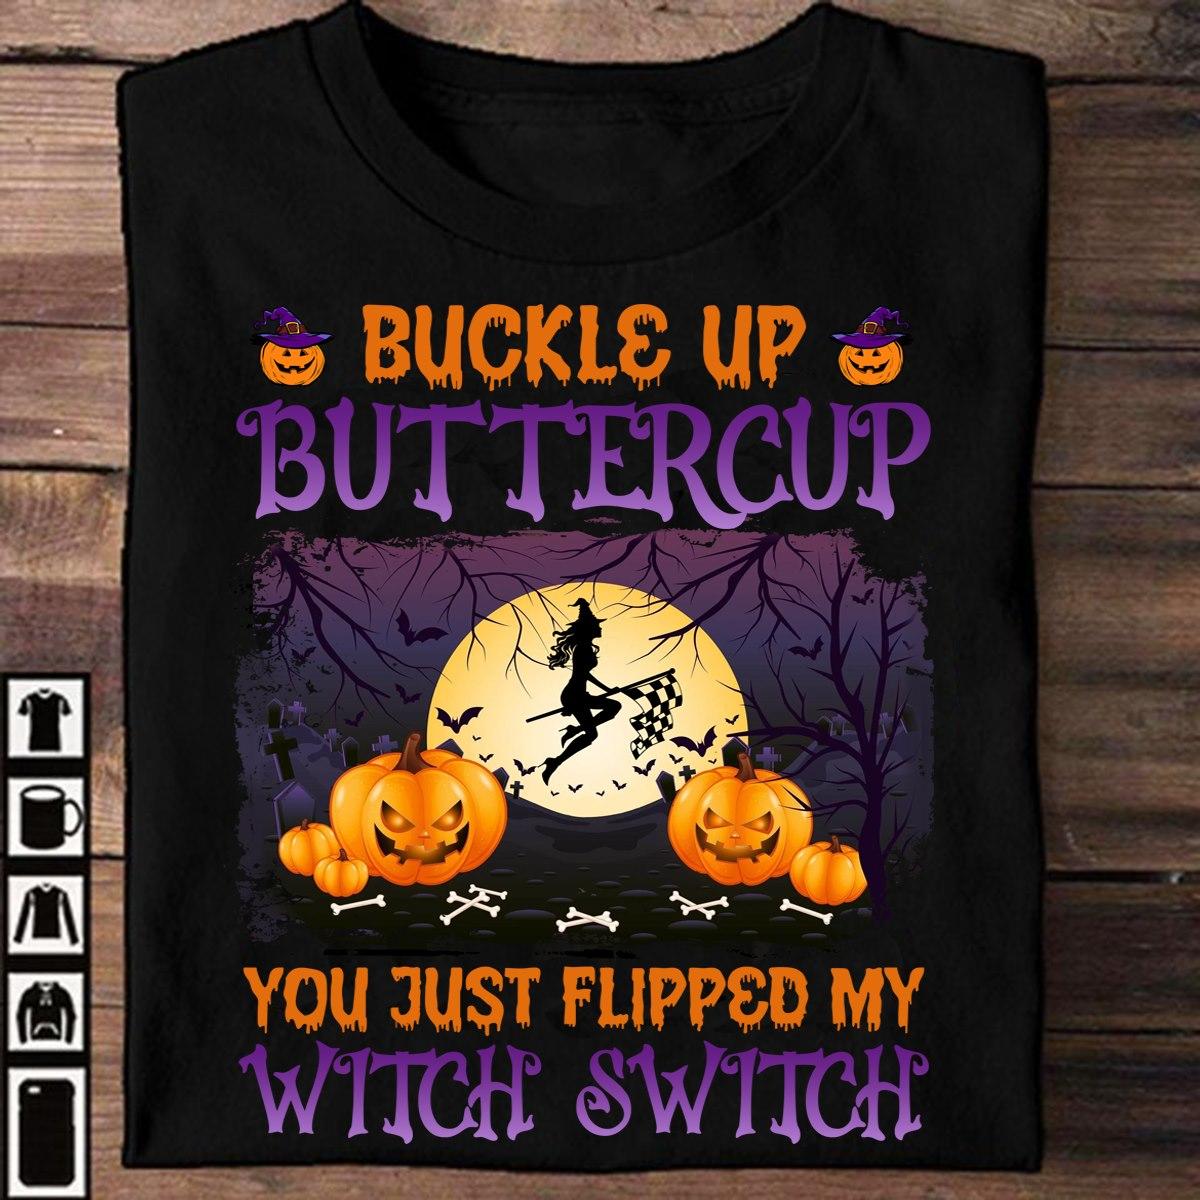 Buckle up buttercup you just flipped my witch switch - Witch go racing, Halloween witch racer gift